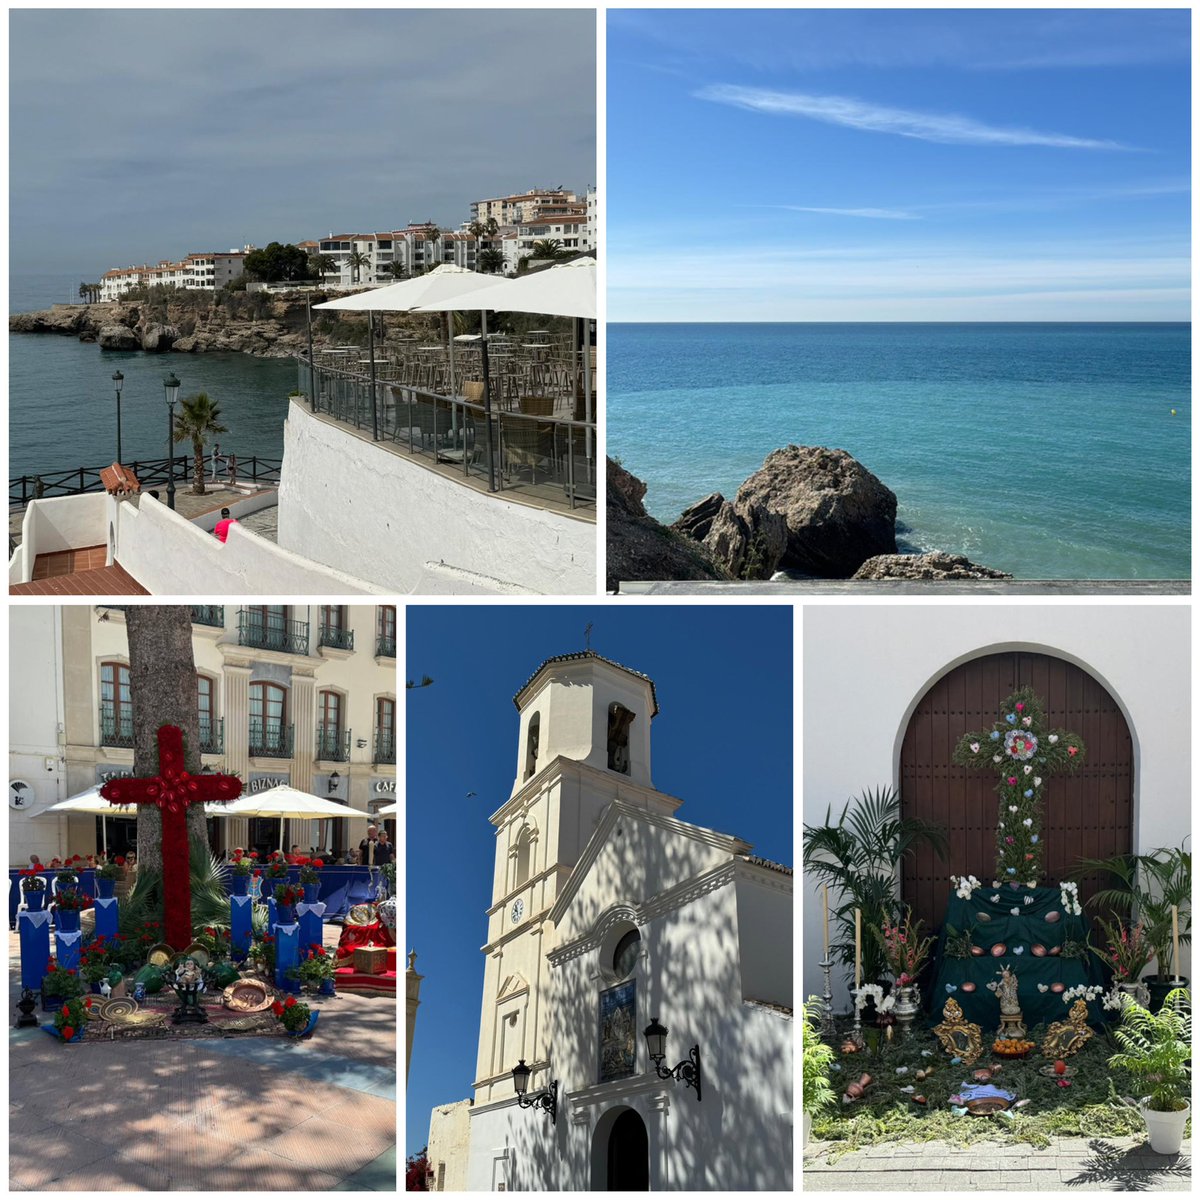 No posts recently as we have been away for a few days #cheadlepetcare #holiday #Spain #nerja